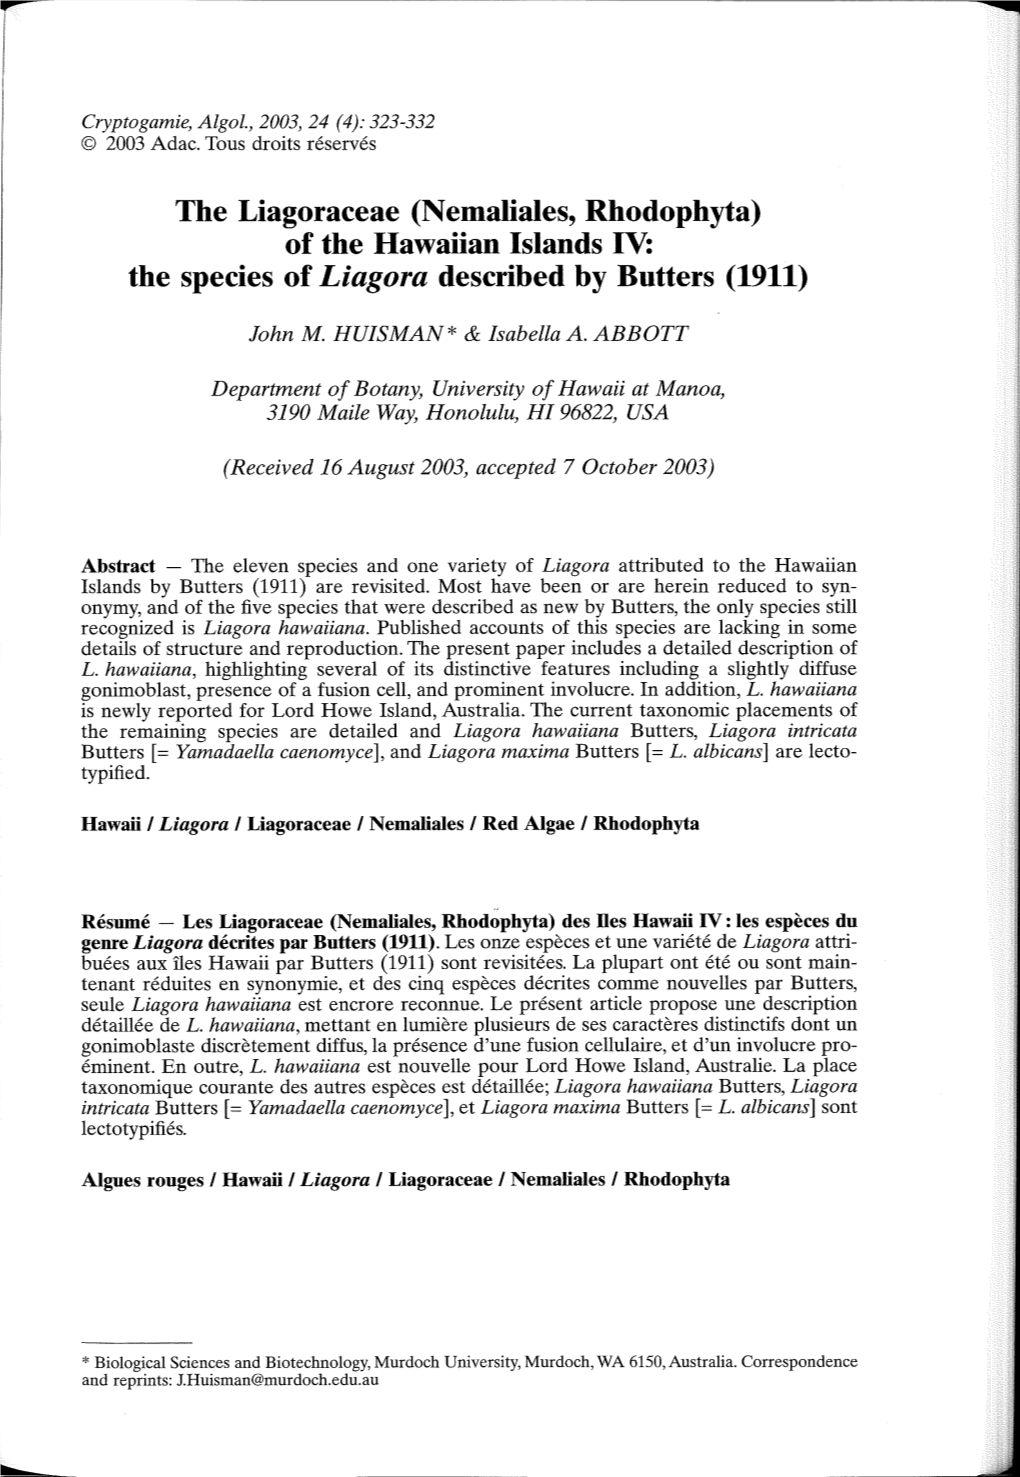 Of the Hawaiian Islands IV: the Species of Liagora Described by Butters (1911)